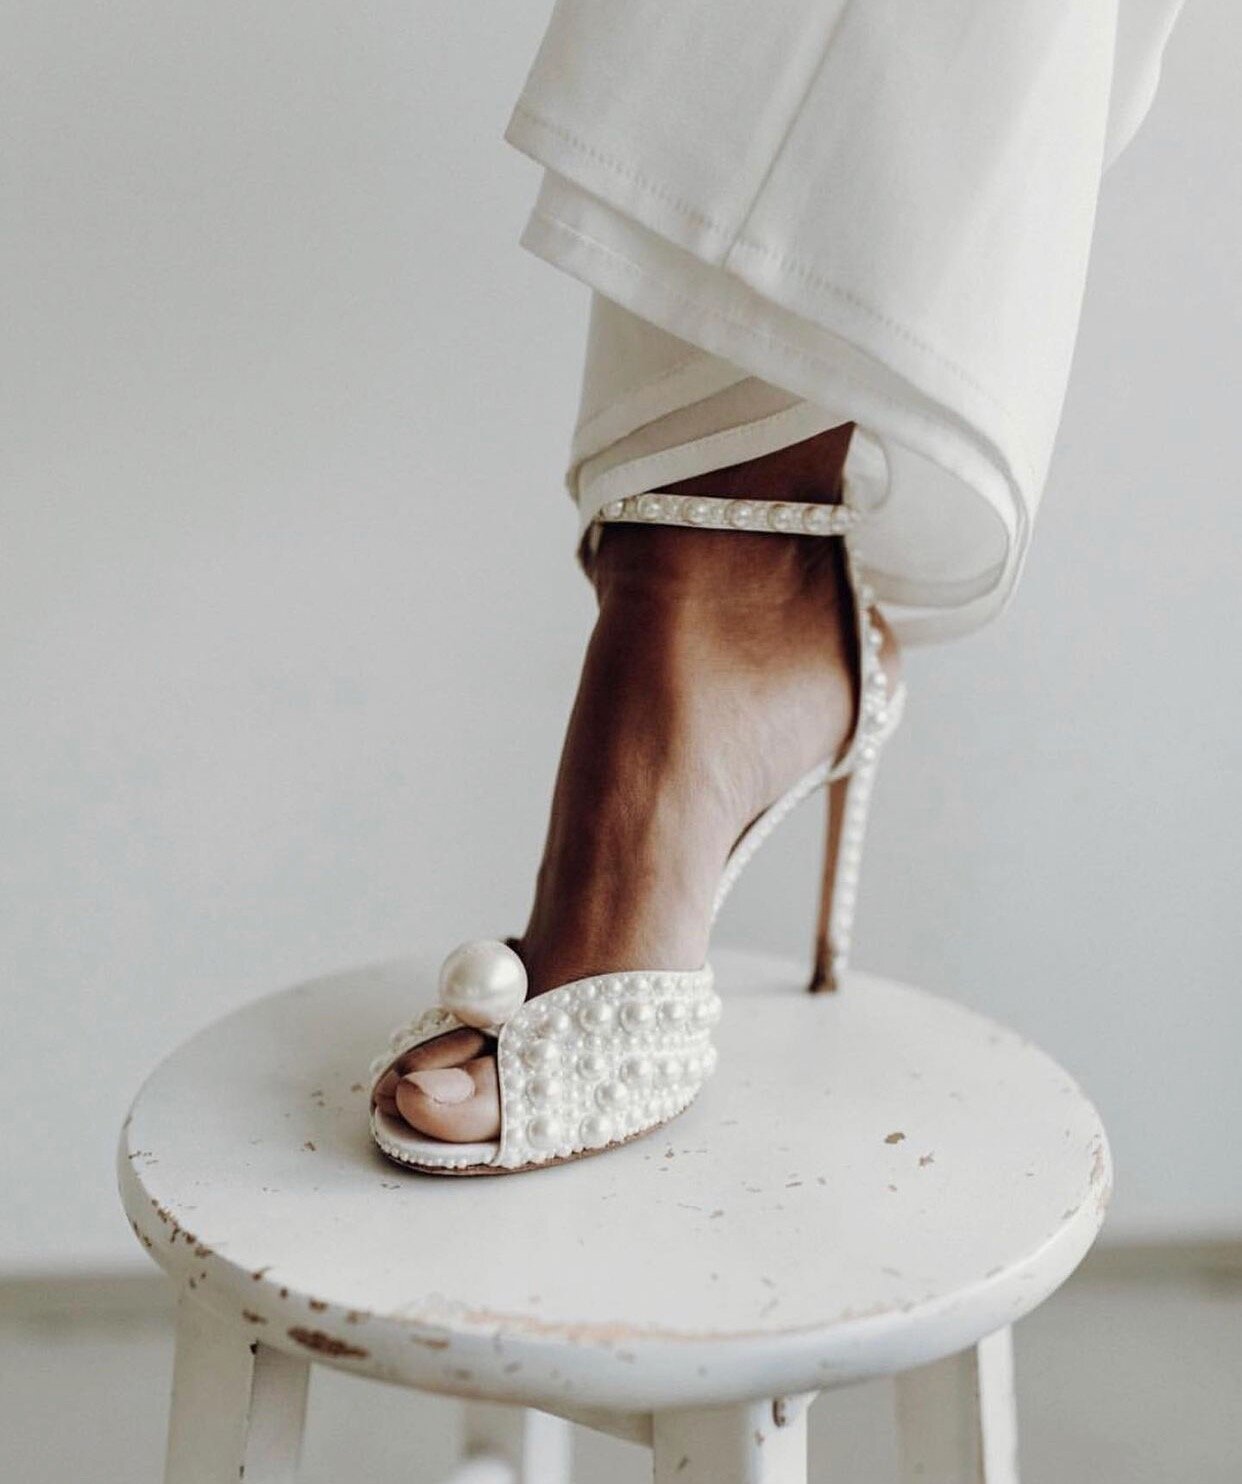 If the Shoe Fits — The Bridal Boutique